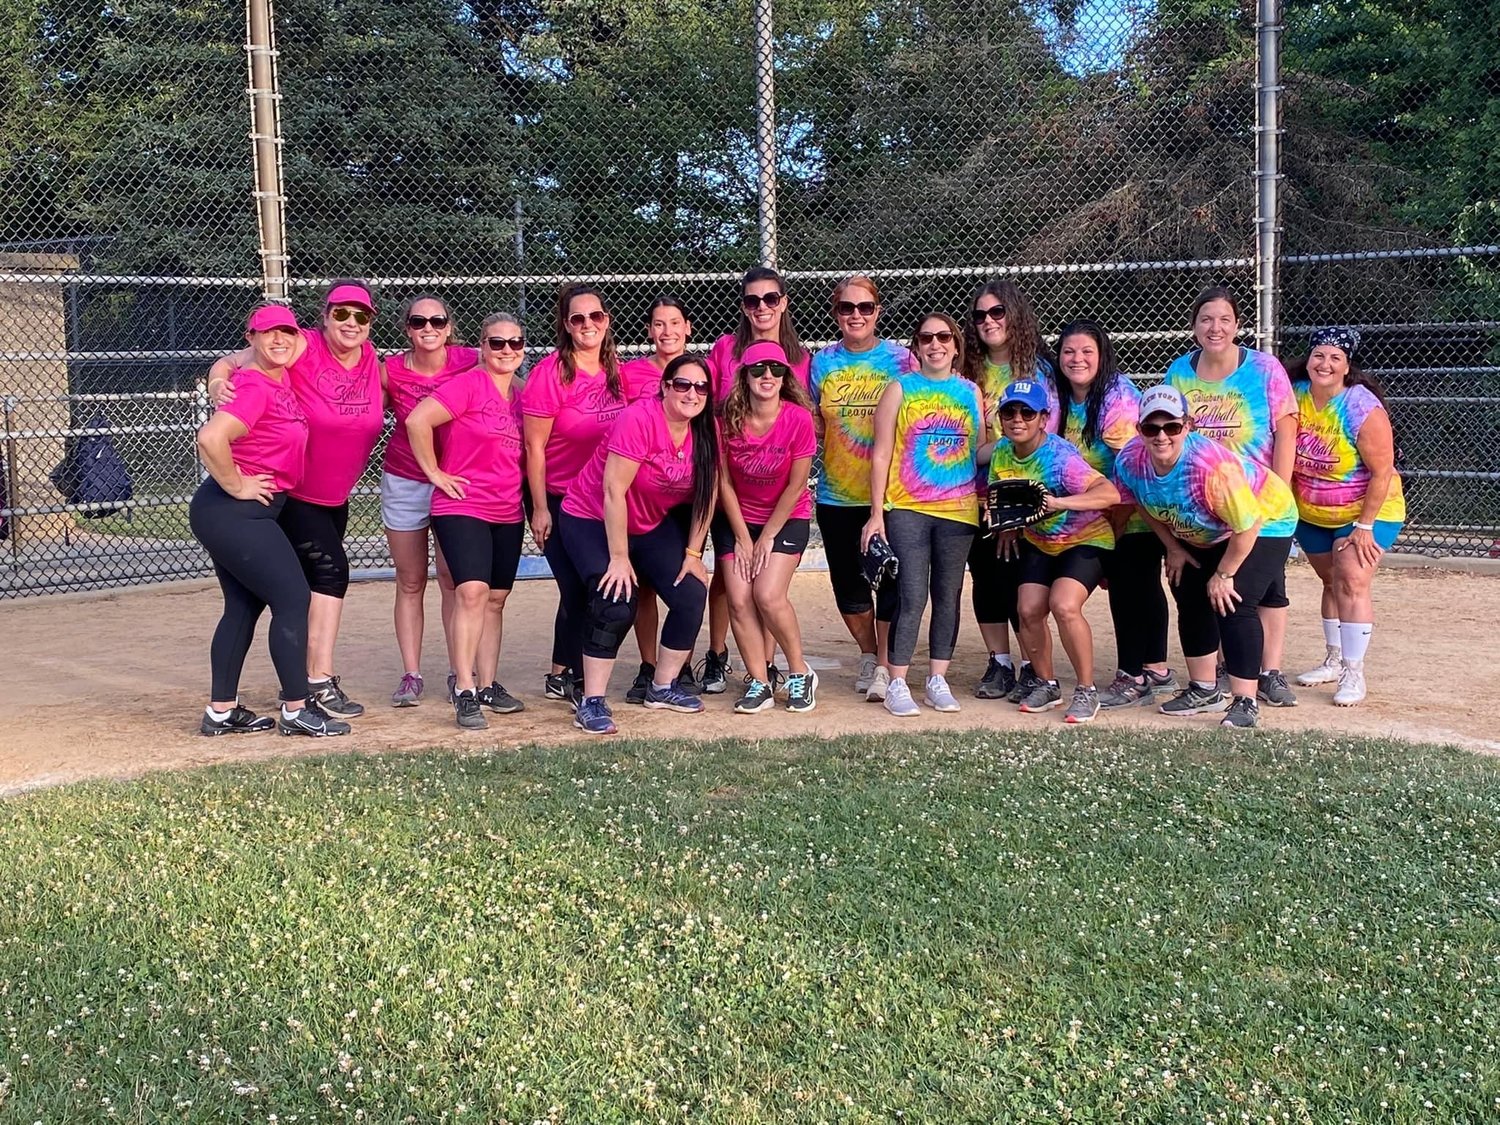 The Salisbury Moms Softball League has a five week season with five games in total.